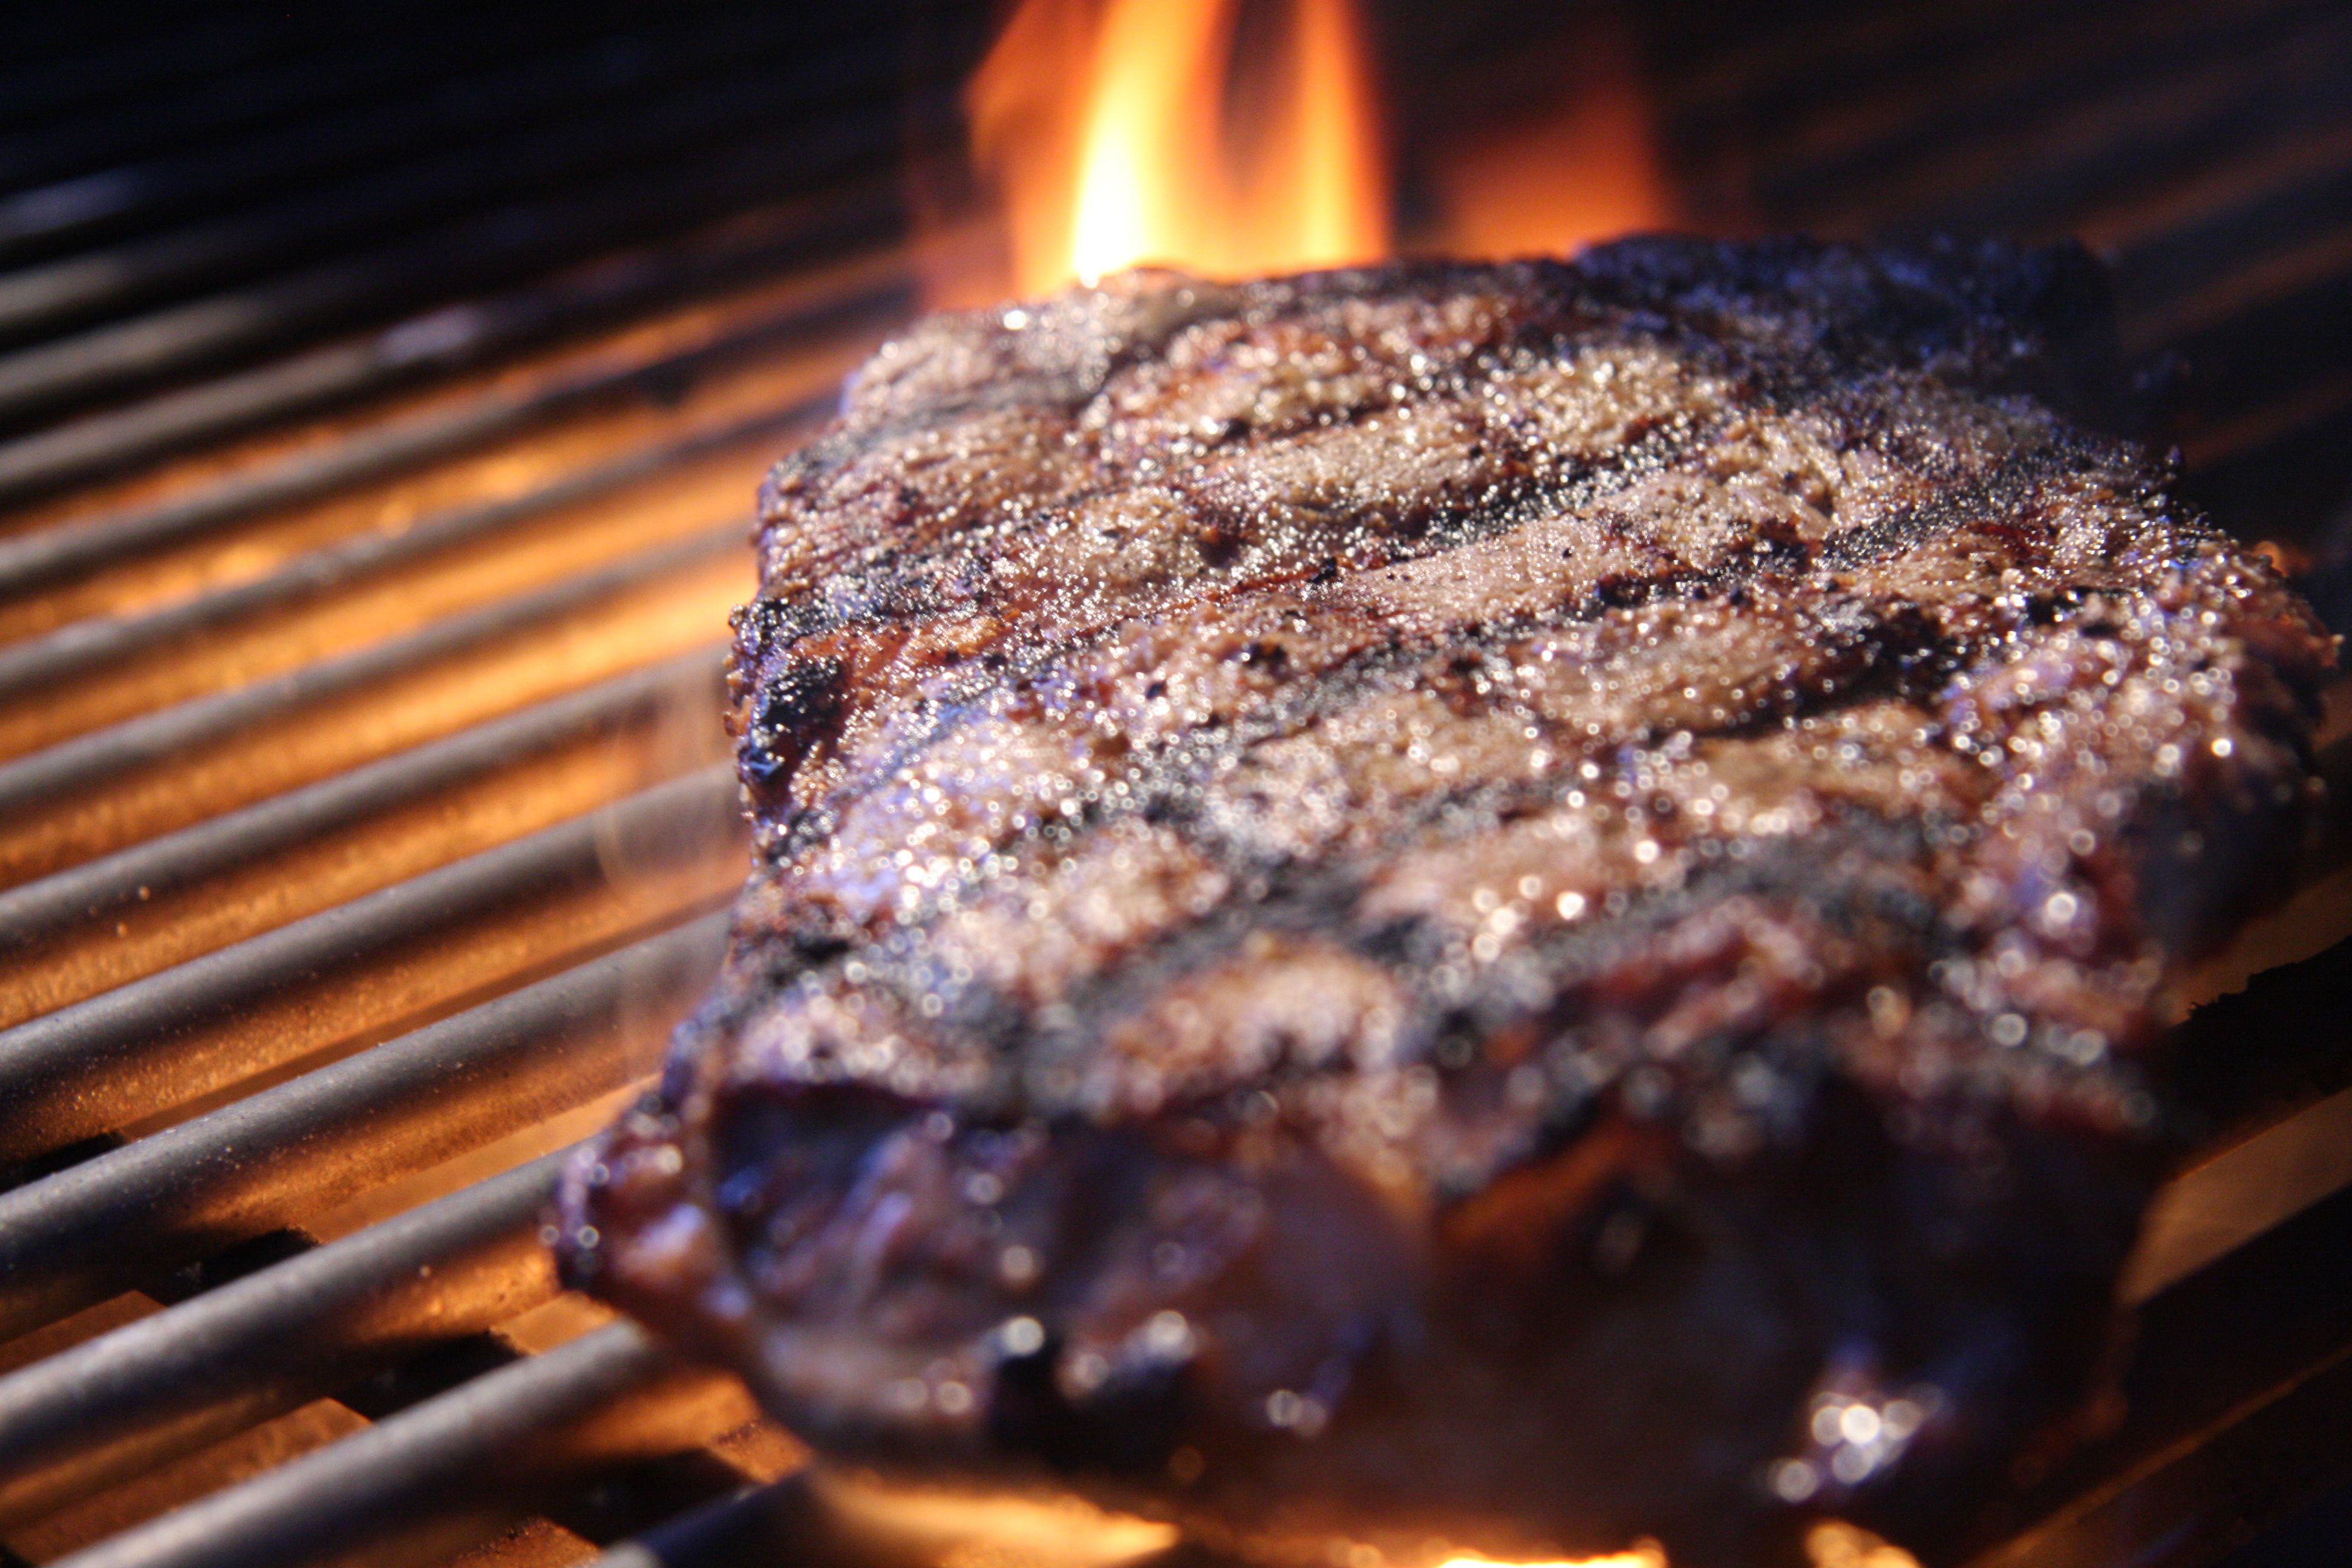 Grilled Steak With Flame 106285825 5a36ce6296f7d000360de465 